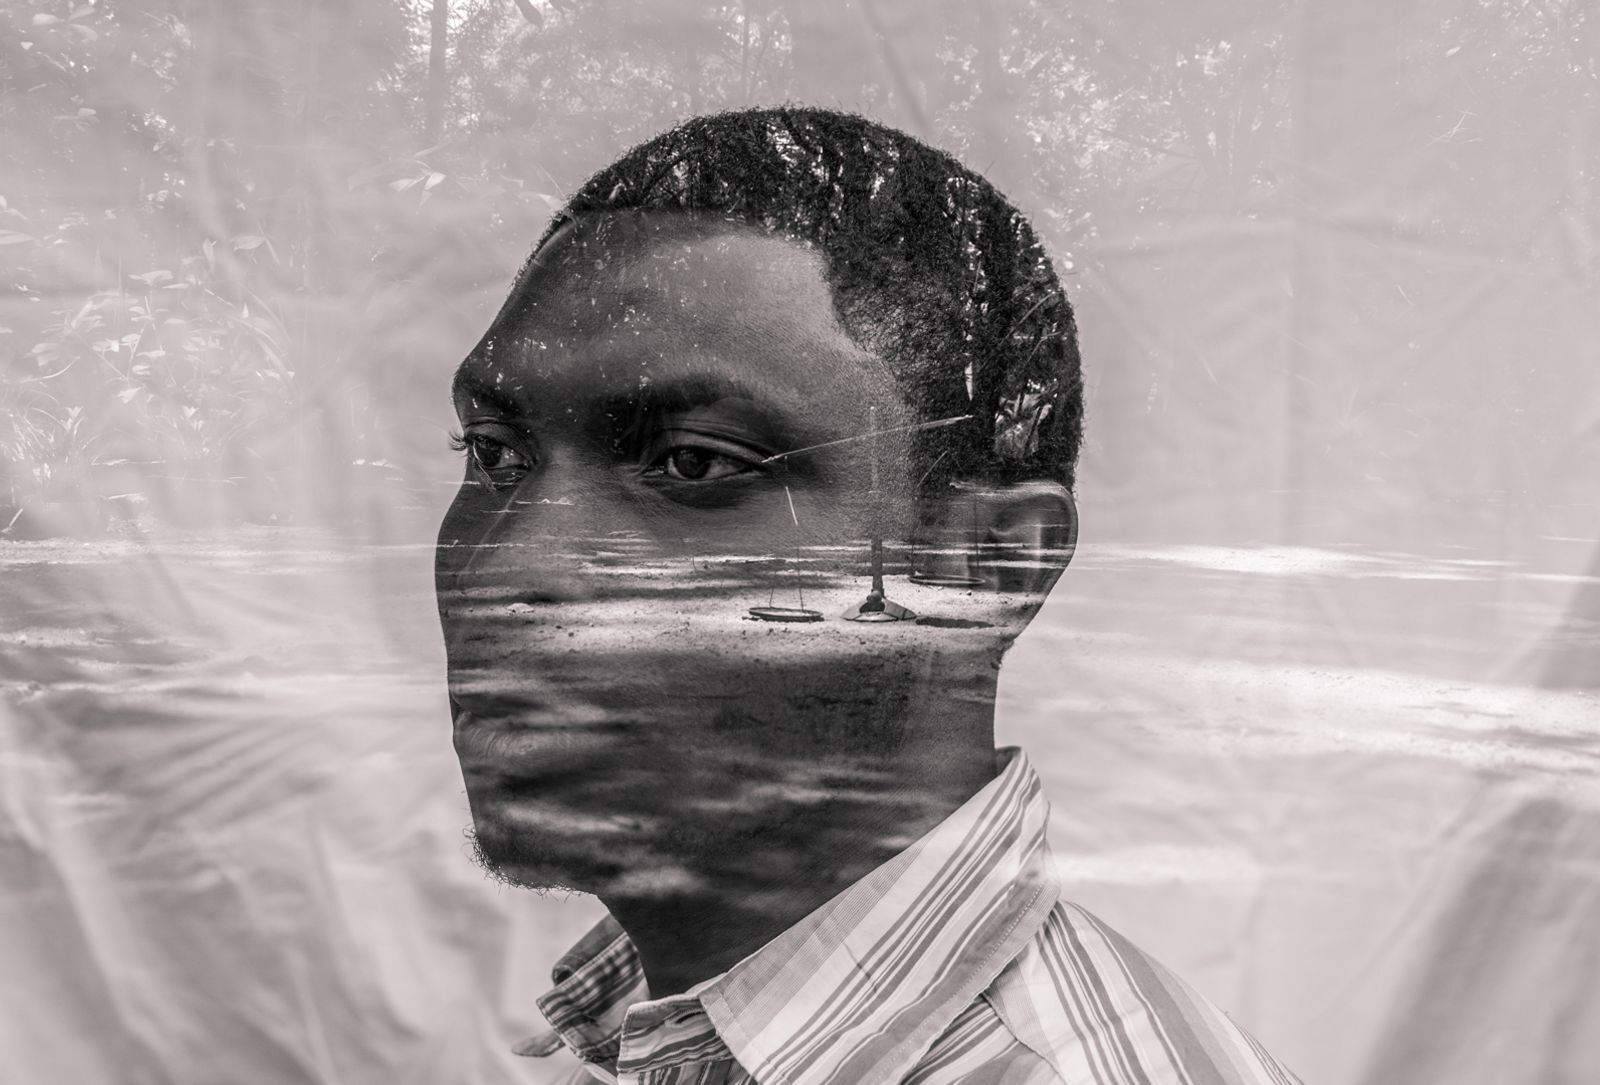 An Abstract Portrayal of Survivors in Nigeria